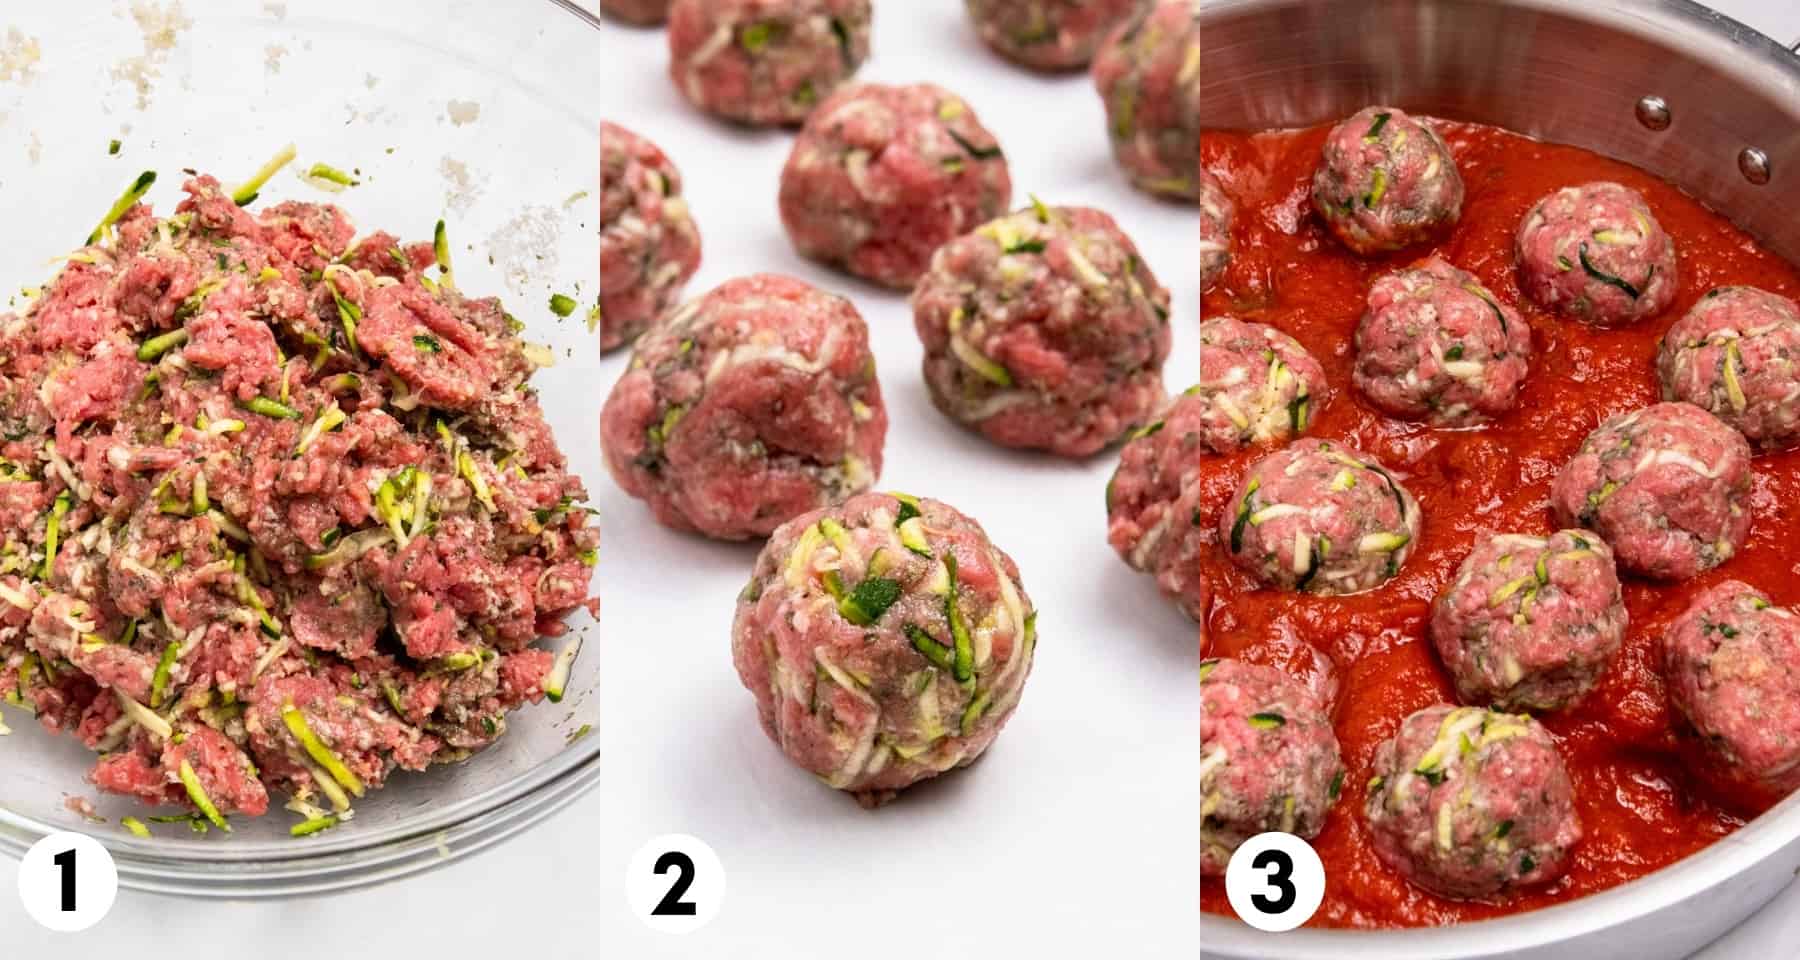 Meatball mixture in mixing bowl and then rolled into balls.